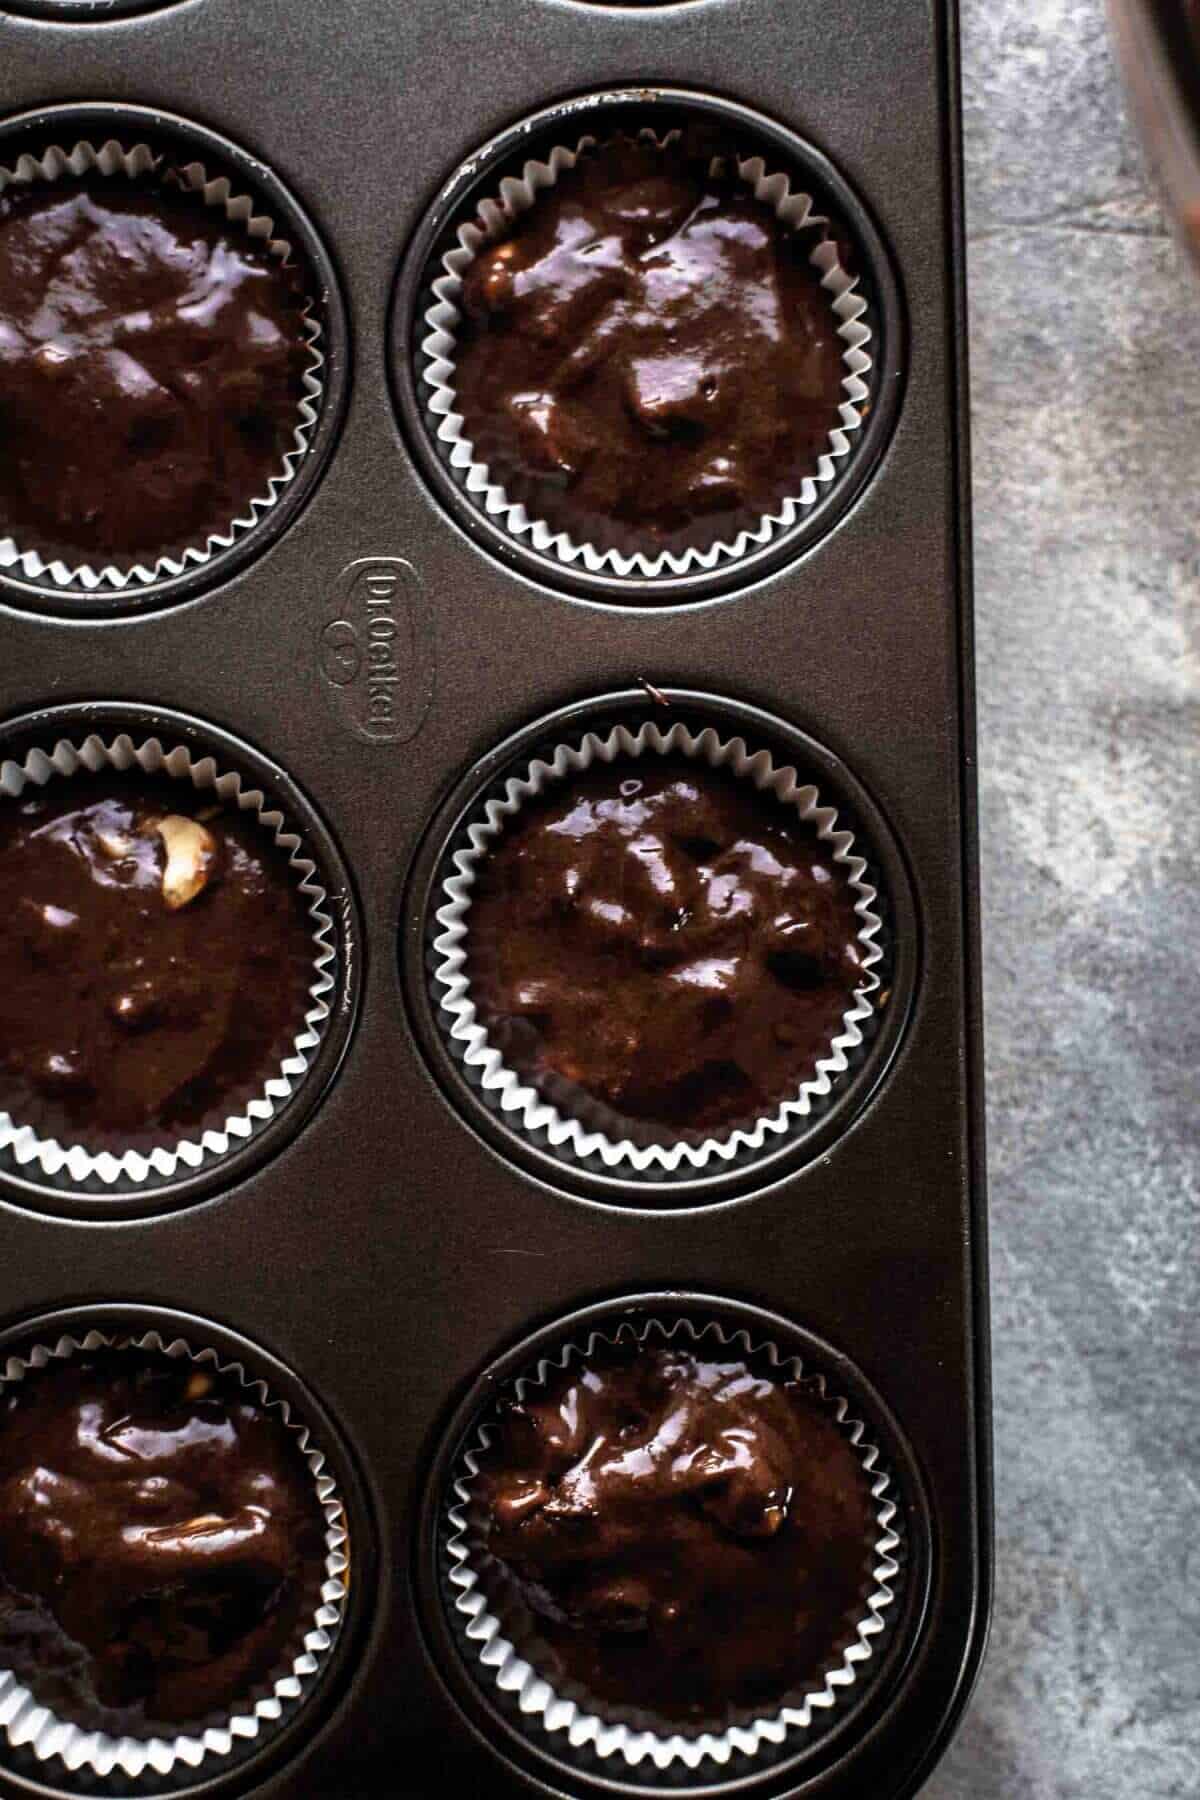 Filled muffin liners with chocolate banana muffins batter